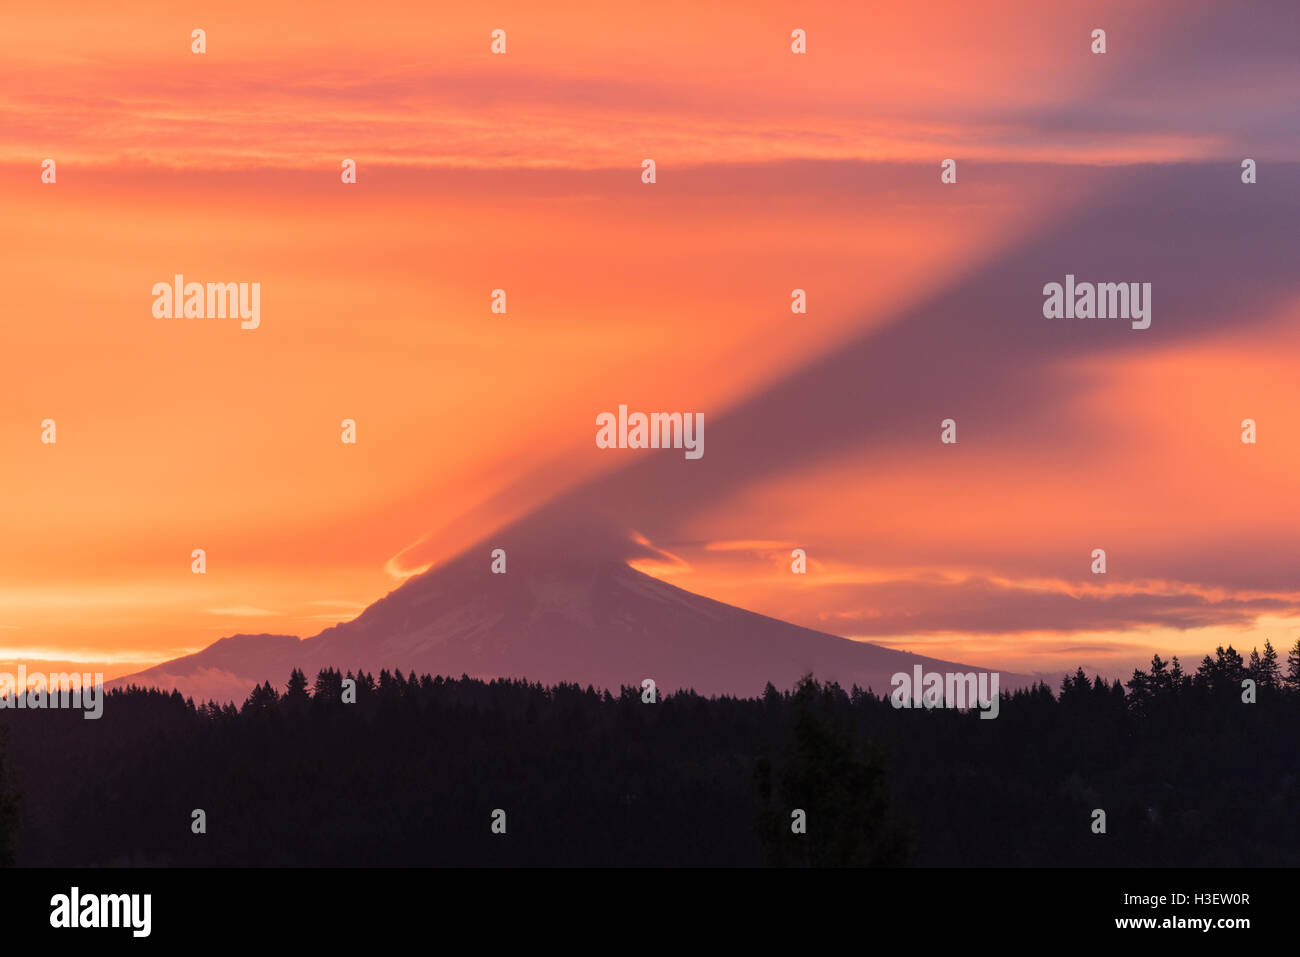 Sunrise behind Mount Hood, Oregon showing shadows and clouds Stock Photo